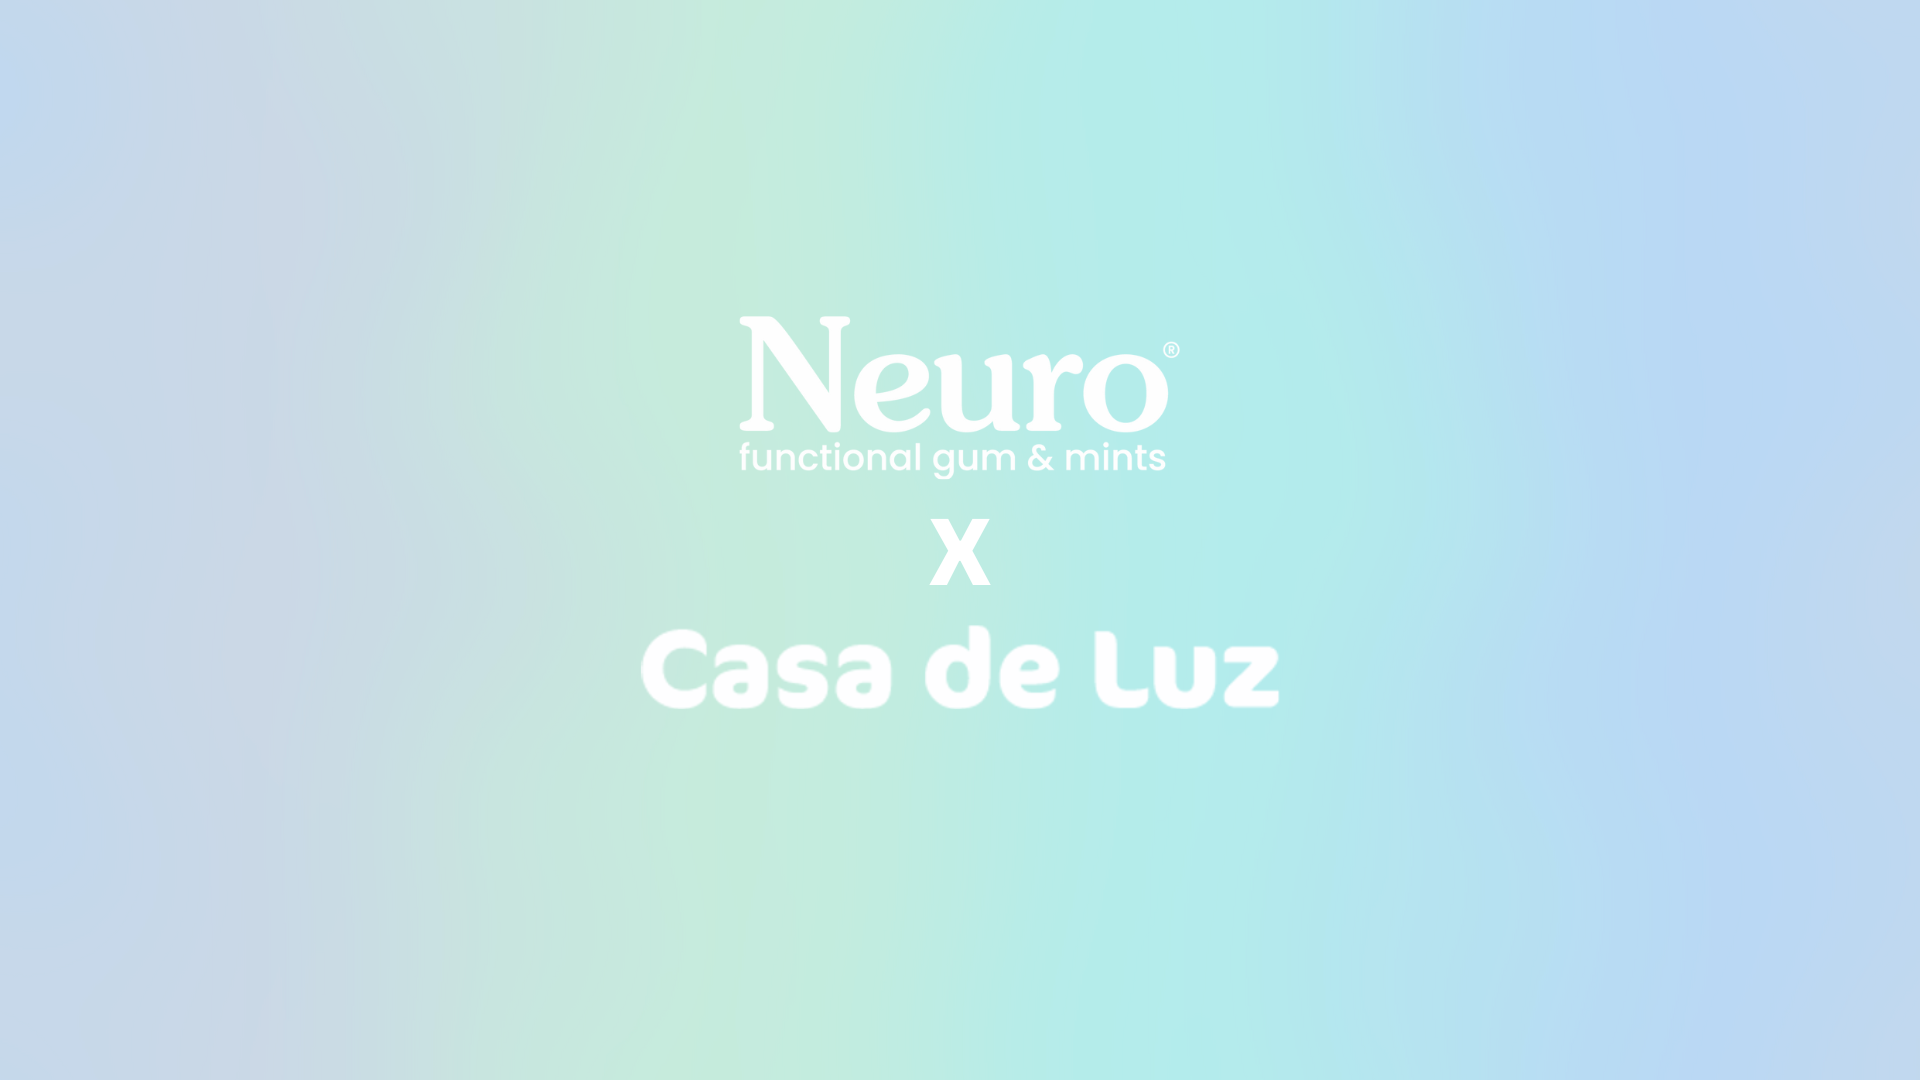 Supporting LGBTQ+ Refugees: Neuro Stands with CASA DE LUZ SD